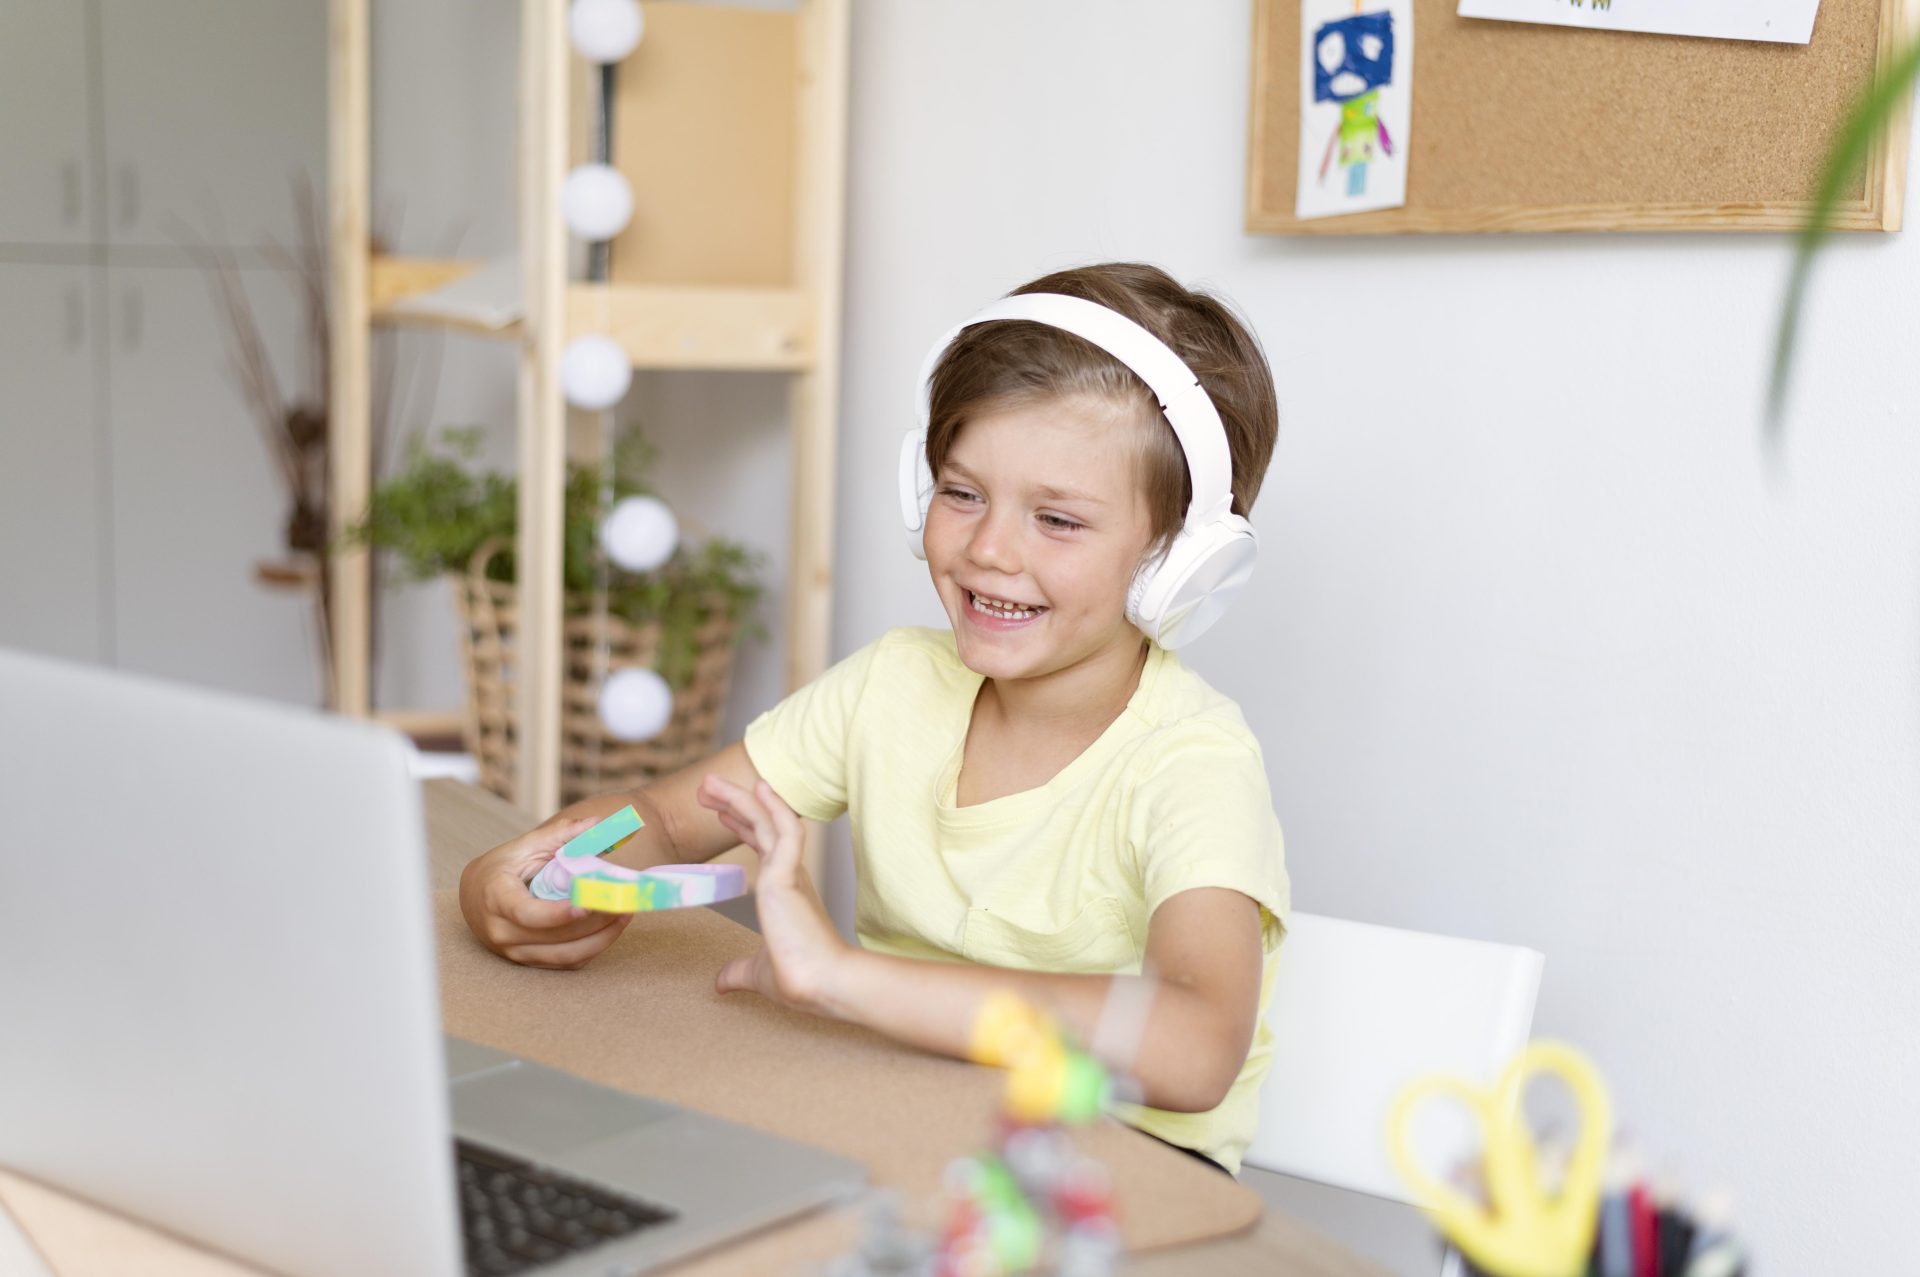 Virtual Elementary Schools: Guide to Online Education